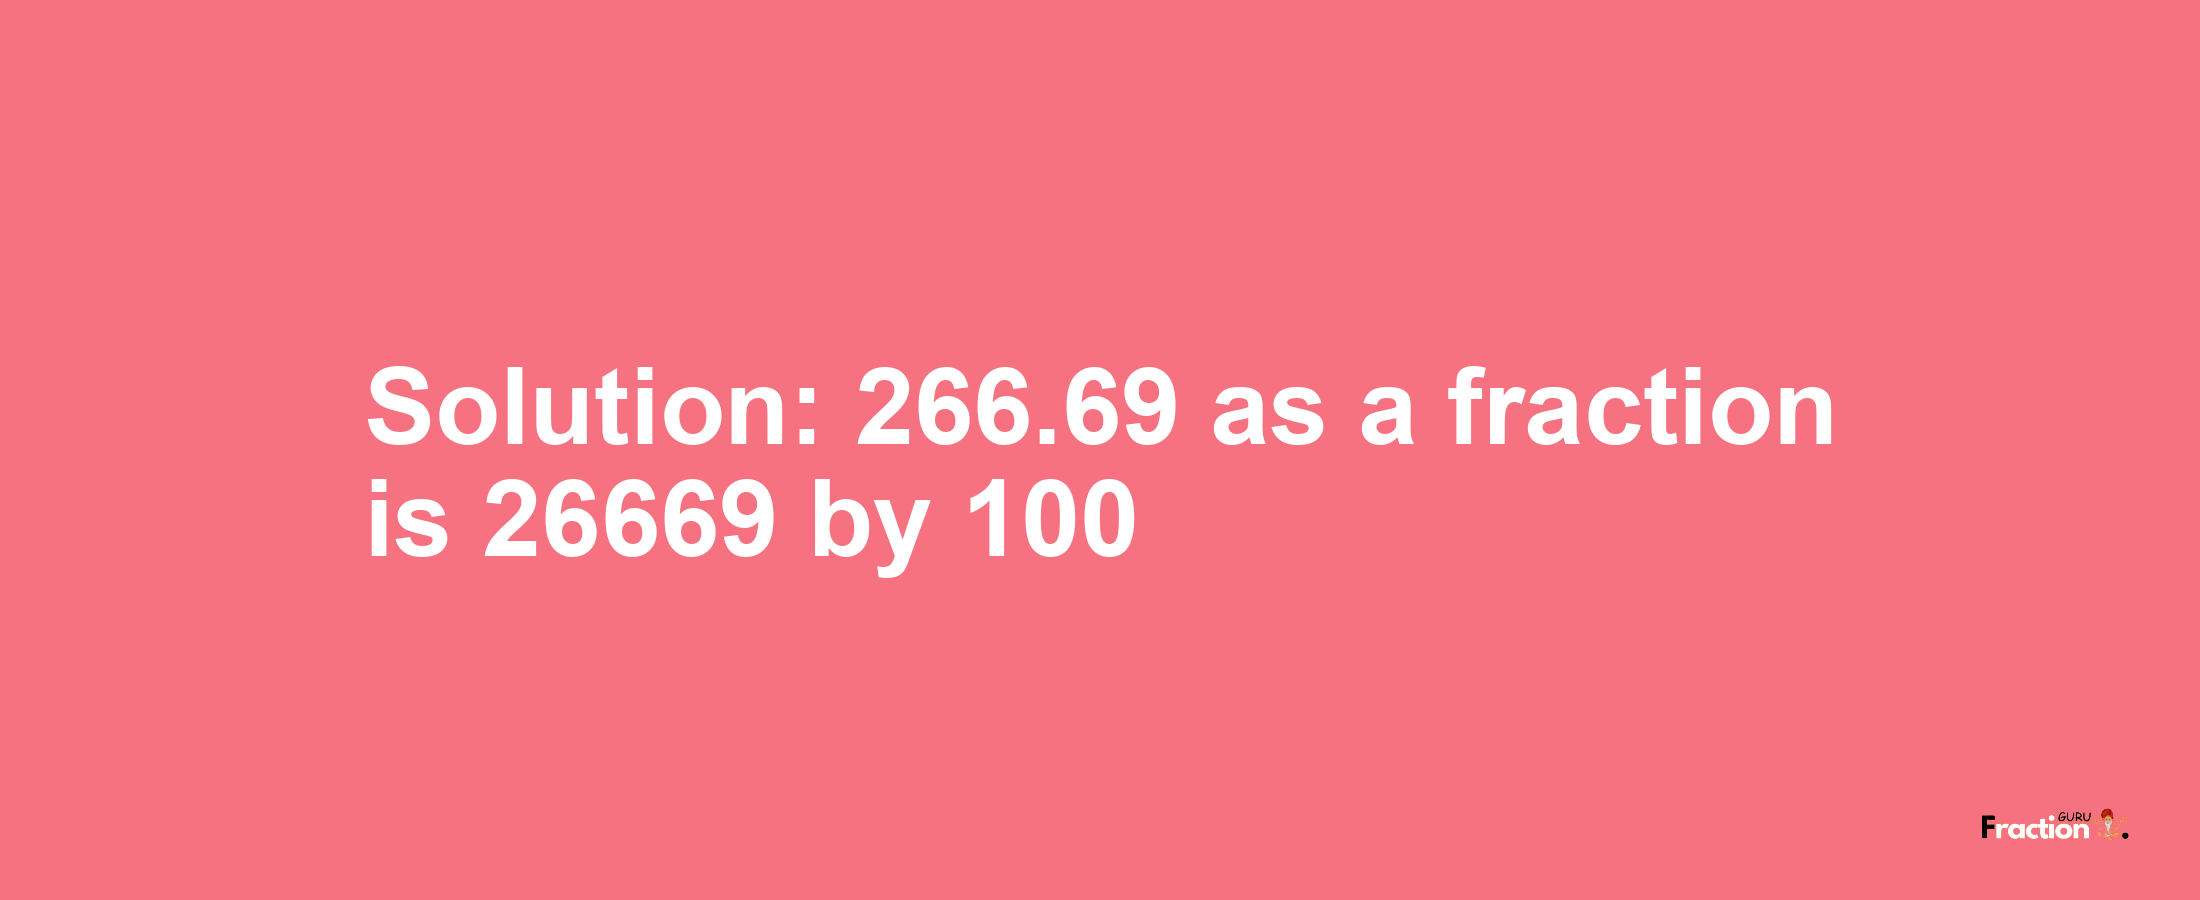 Solution:266.69 as a fraction is 26669/100